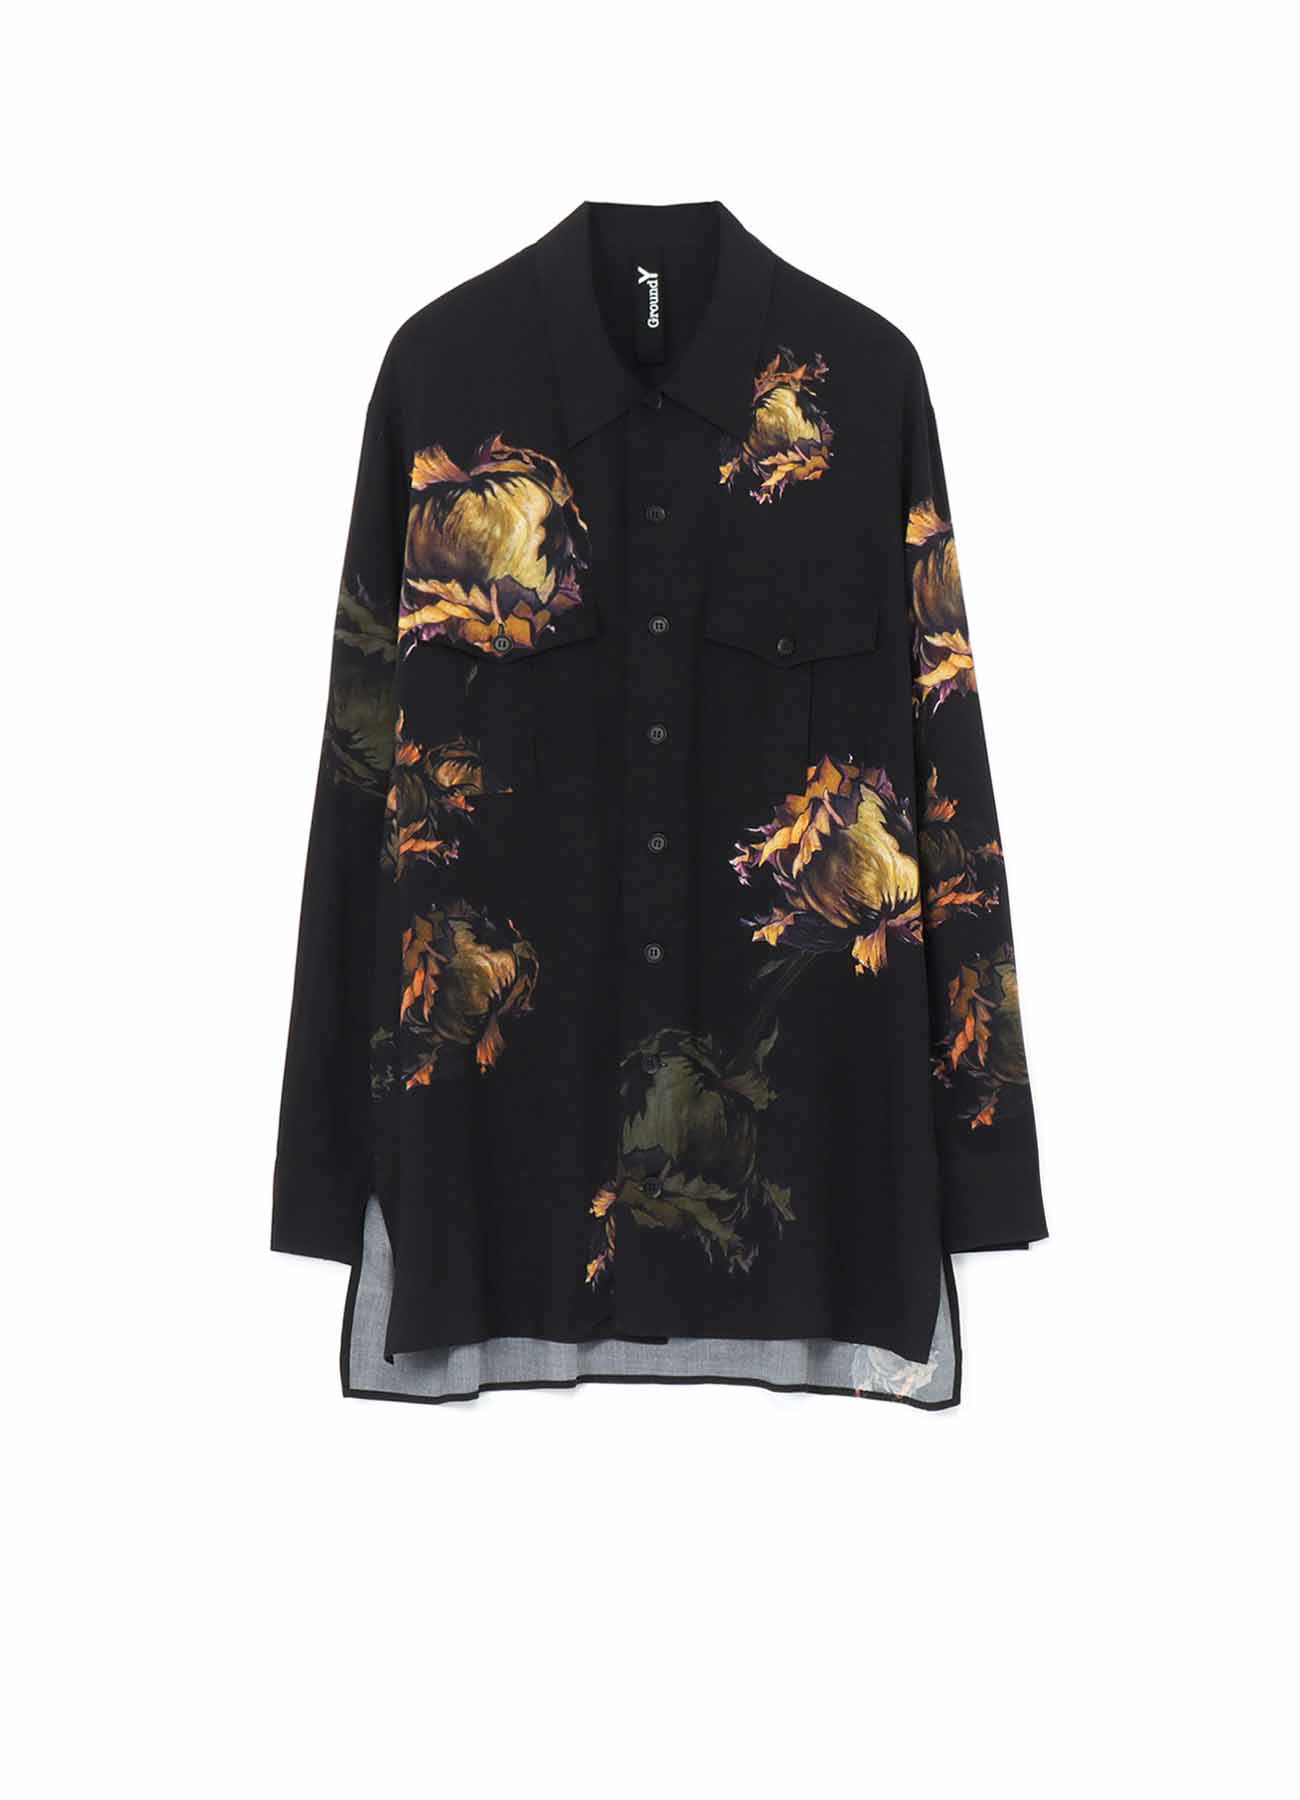 Pressed Flower A Rayon French Military Shirt